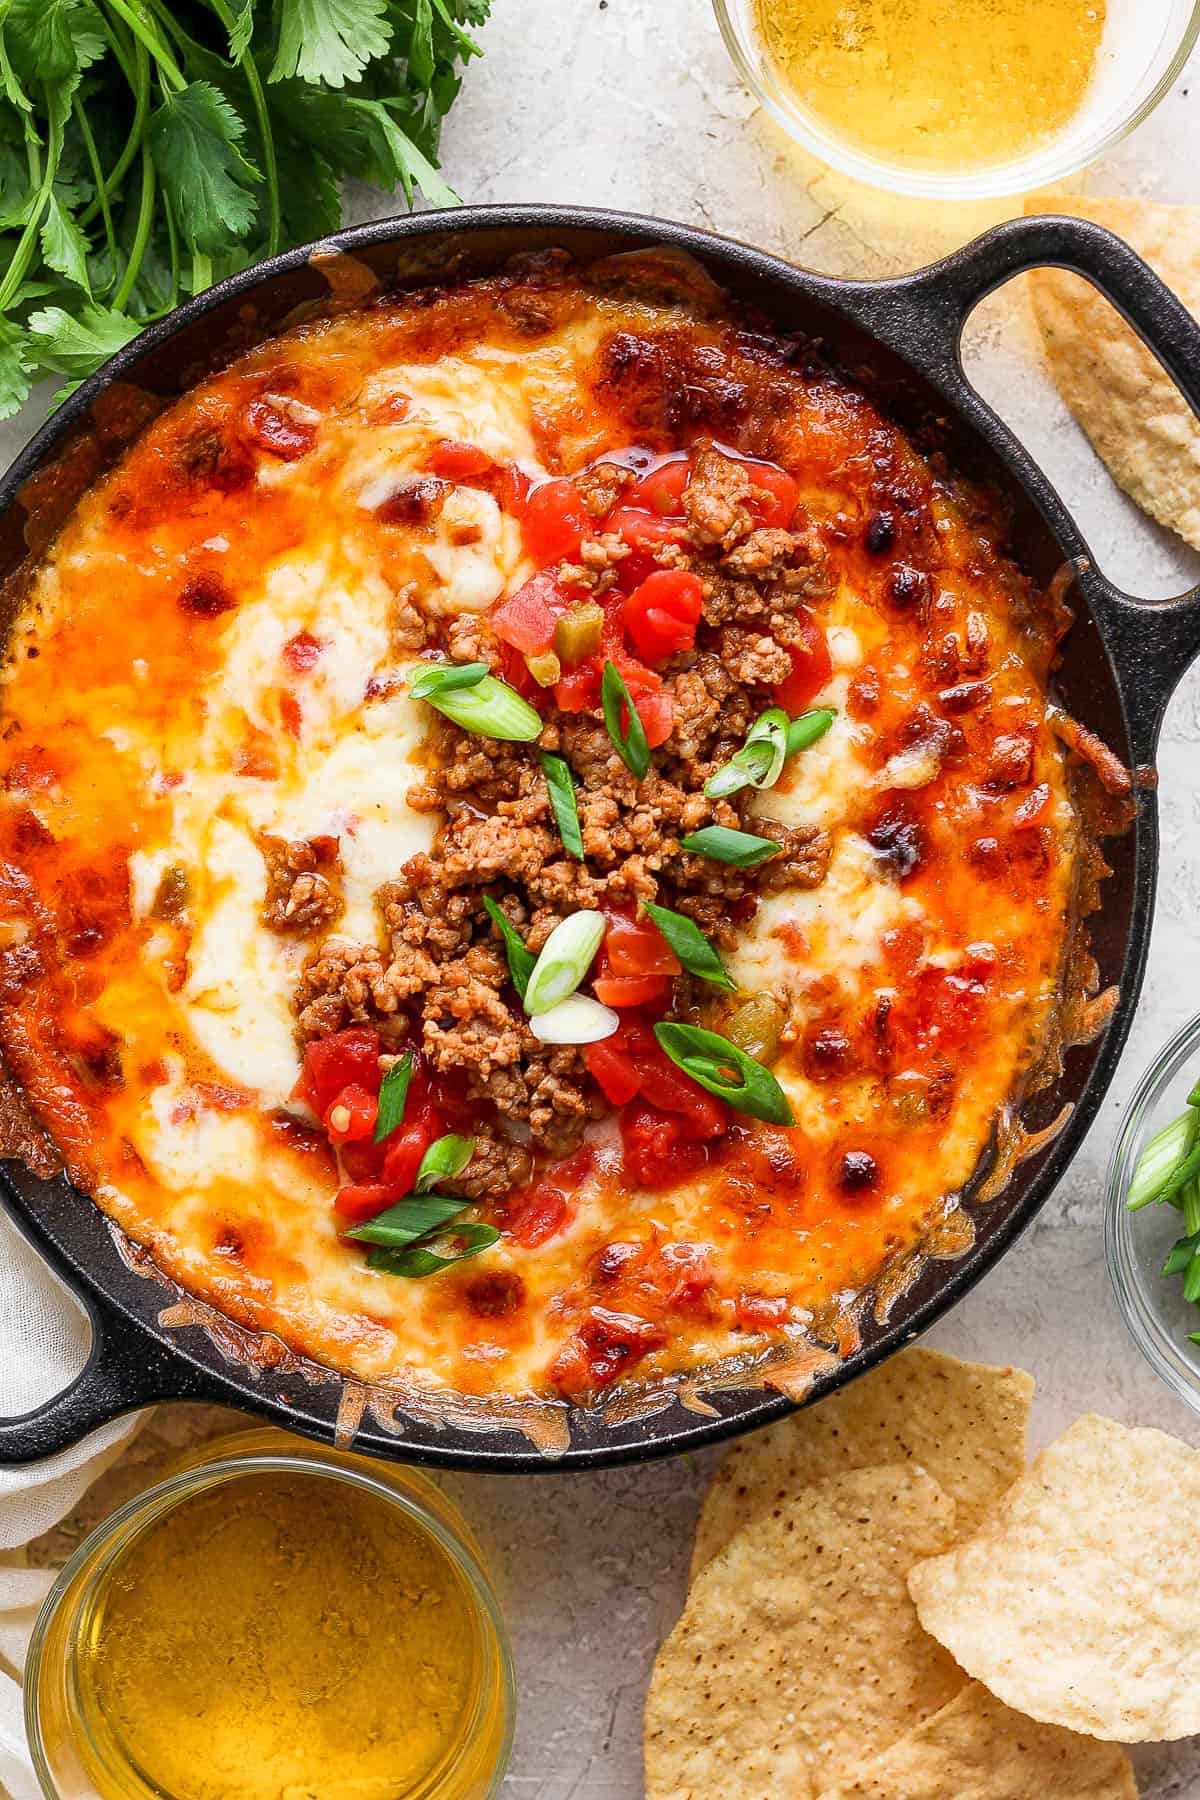 The best recipe for a smoked queso dip.